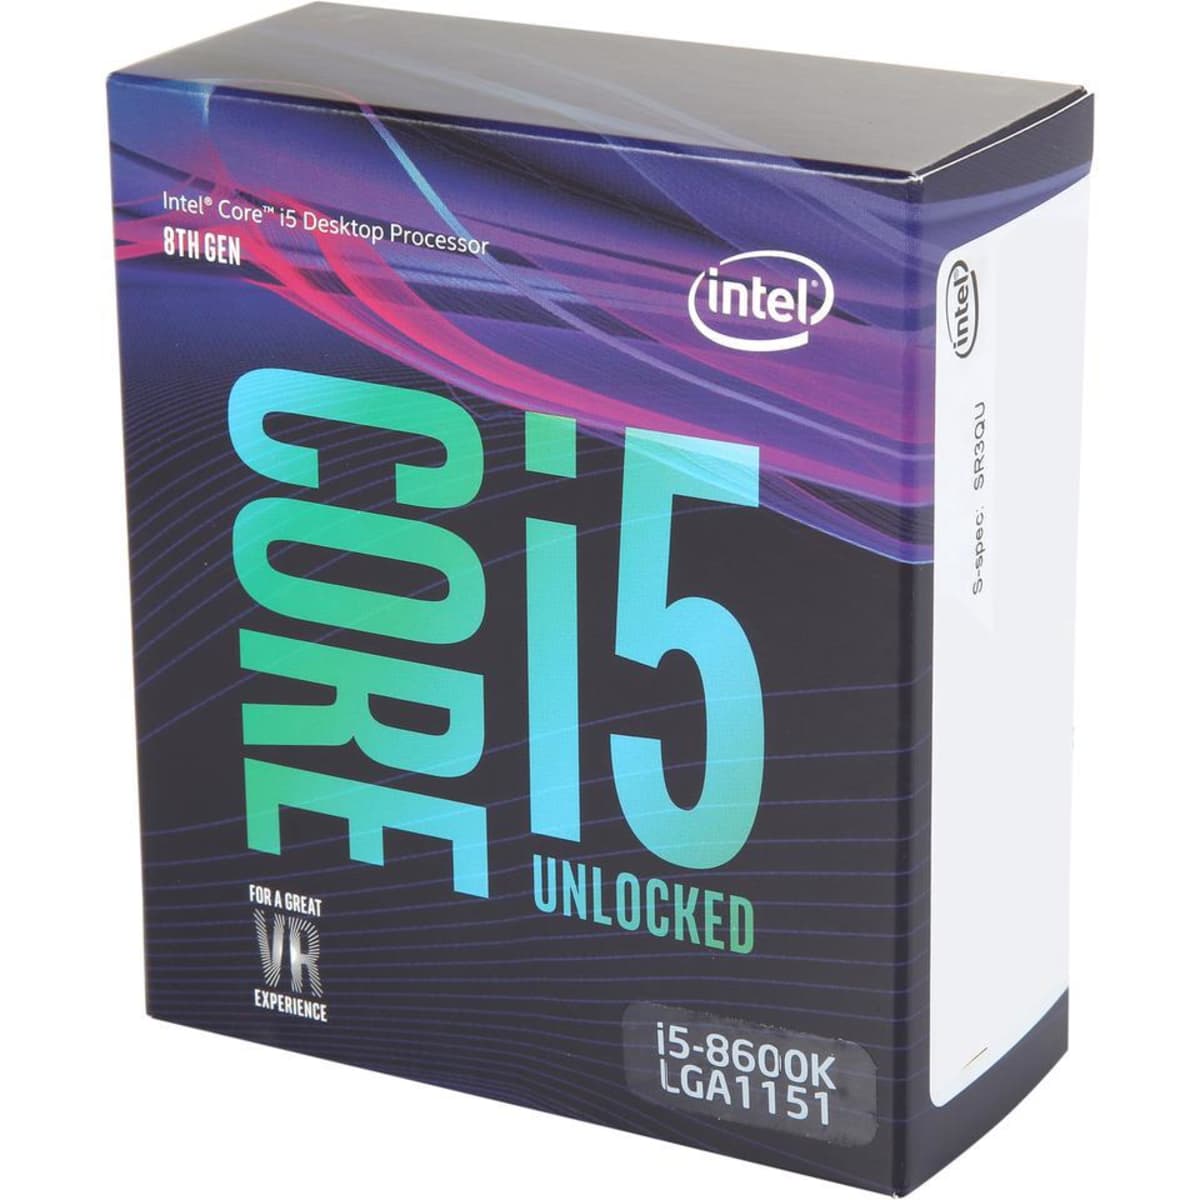 Fest Flytte Lignende Intel Core i5-8400 Coffee Lake CPU Review and Benchmarks - HubPages